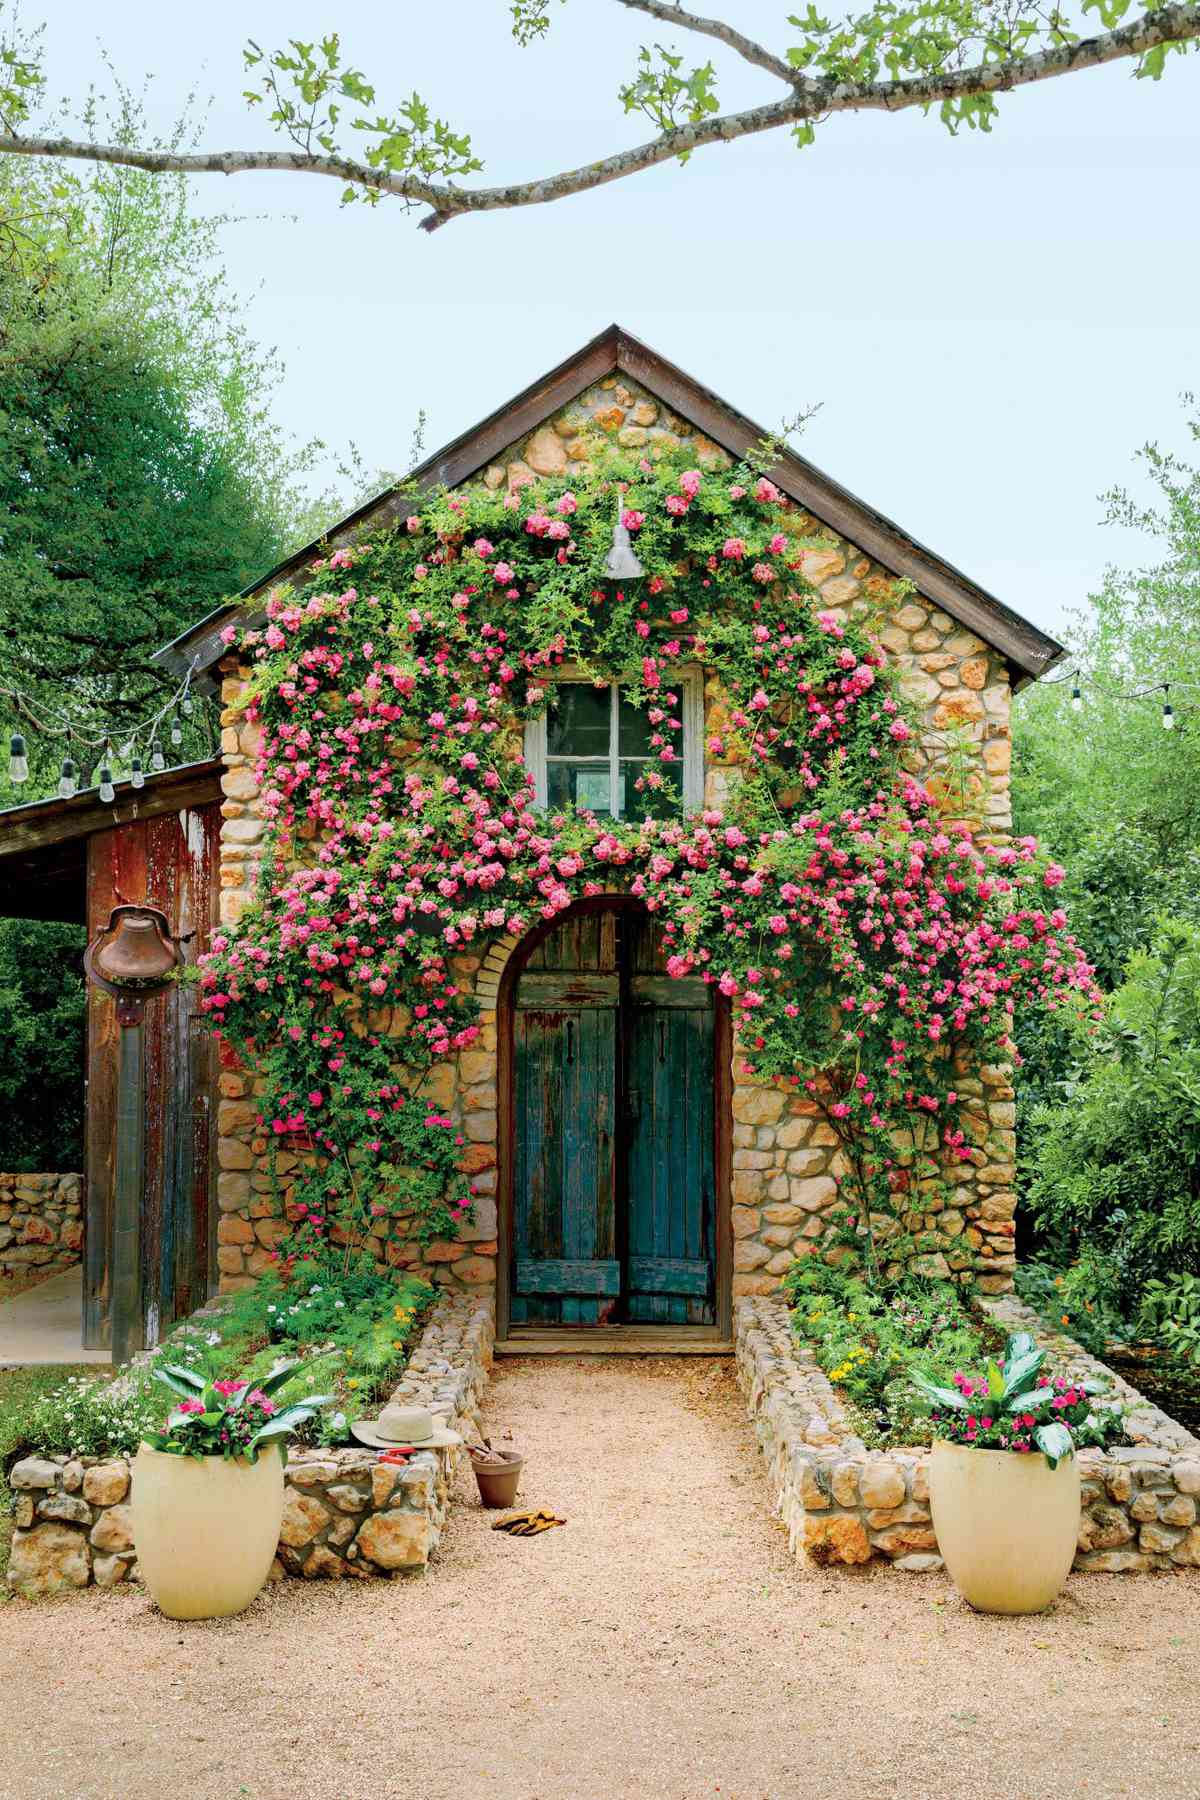 Peggy Martin Rose on Garden Shed